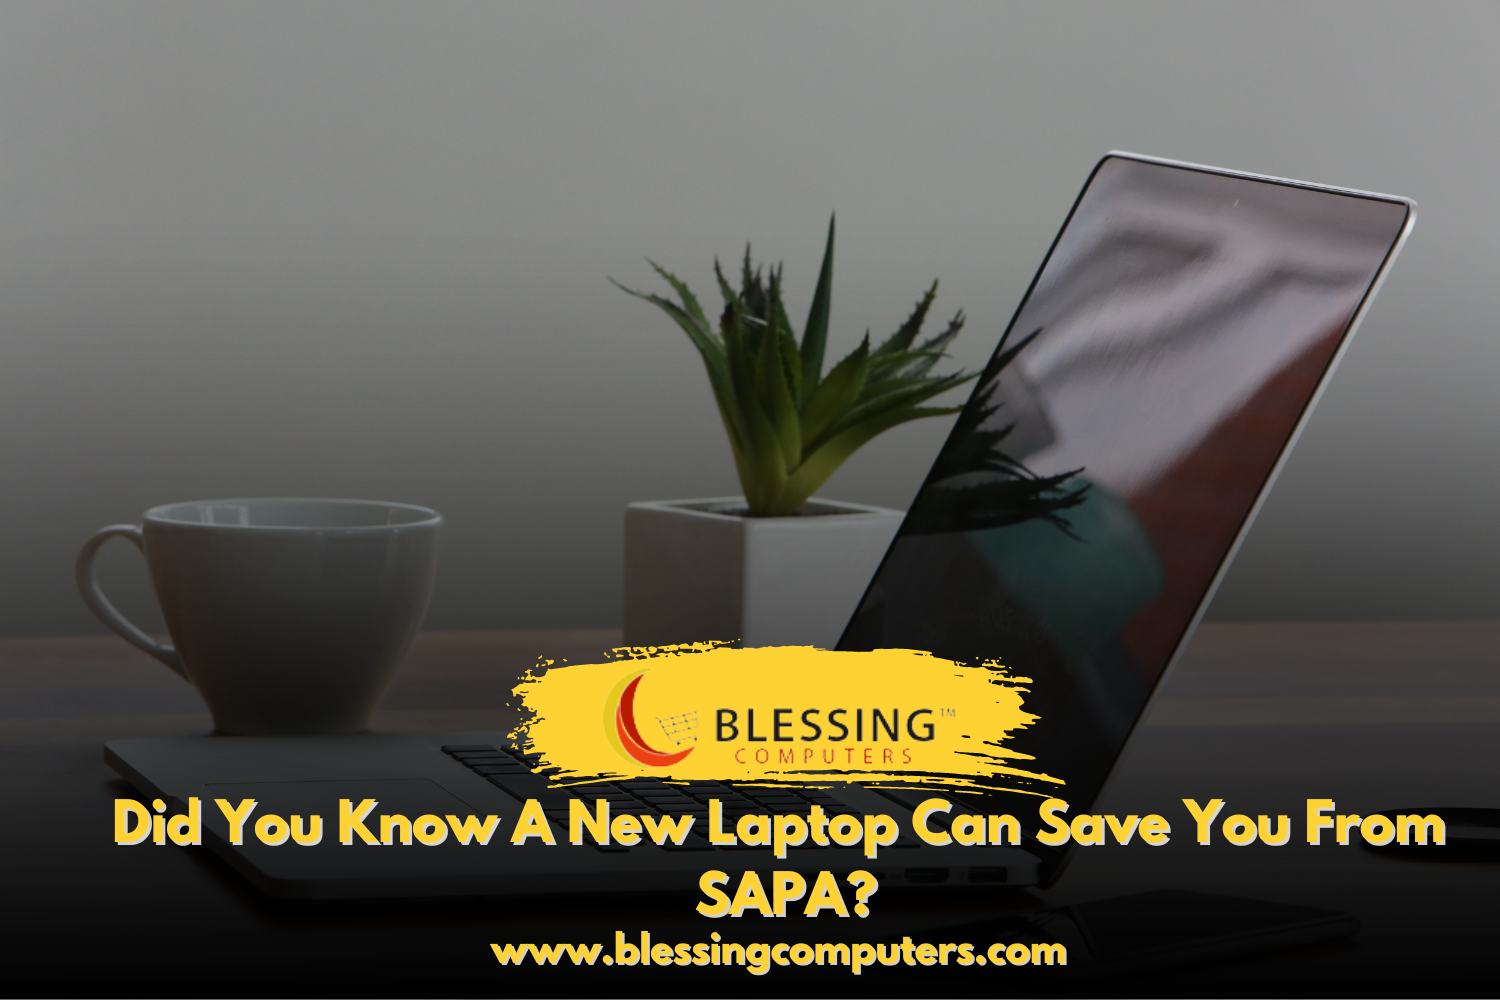 Did You Know A New Laptop Can Save You From SAPA